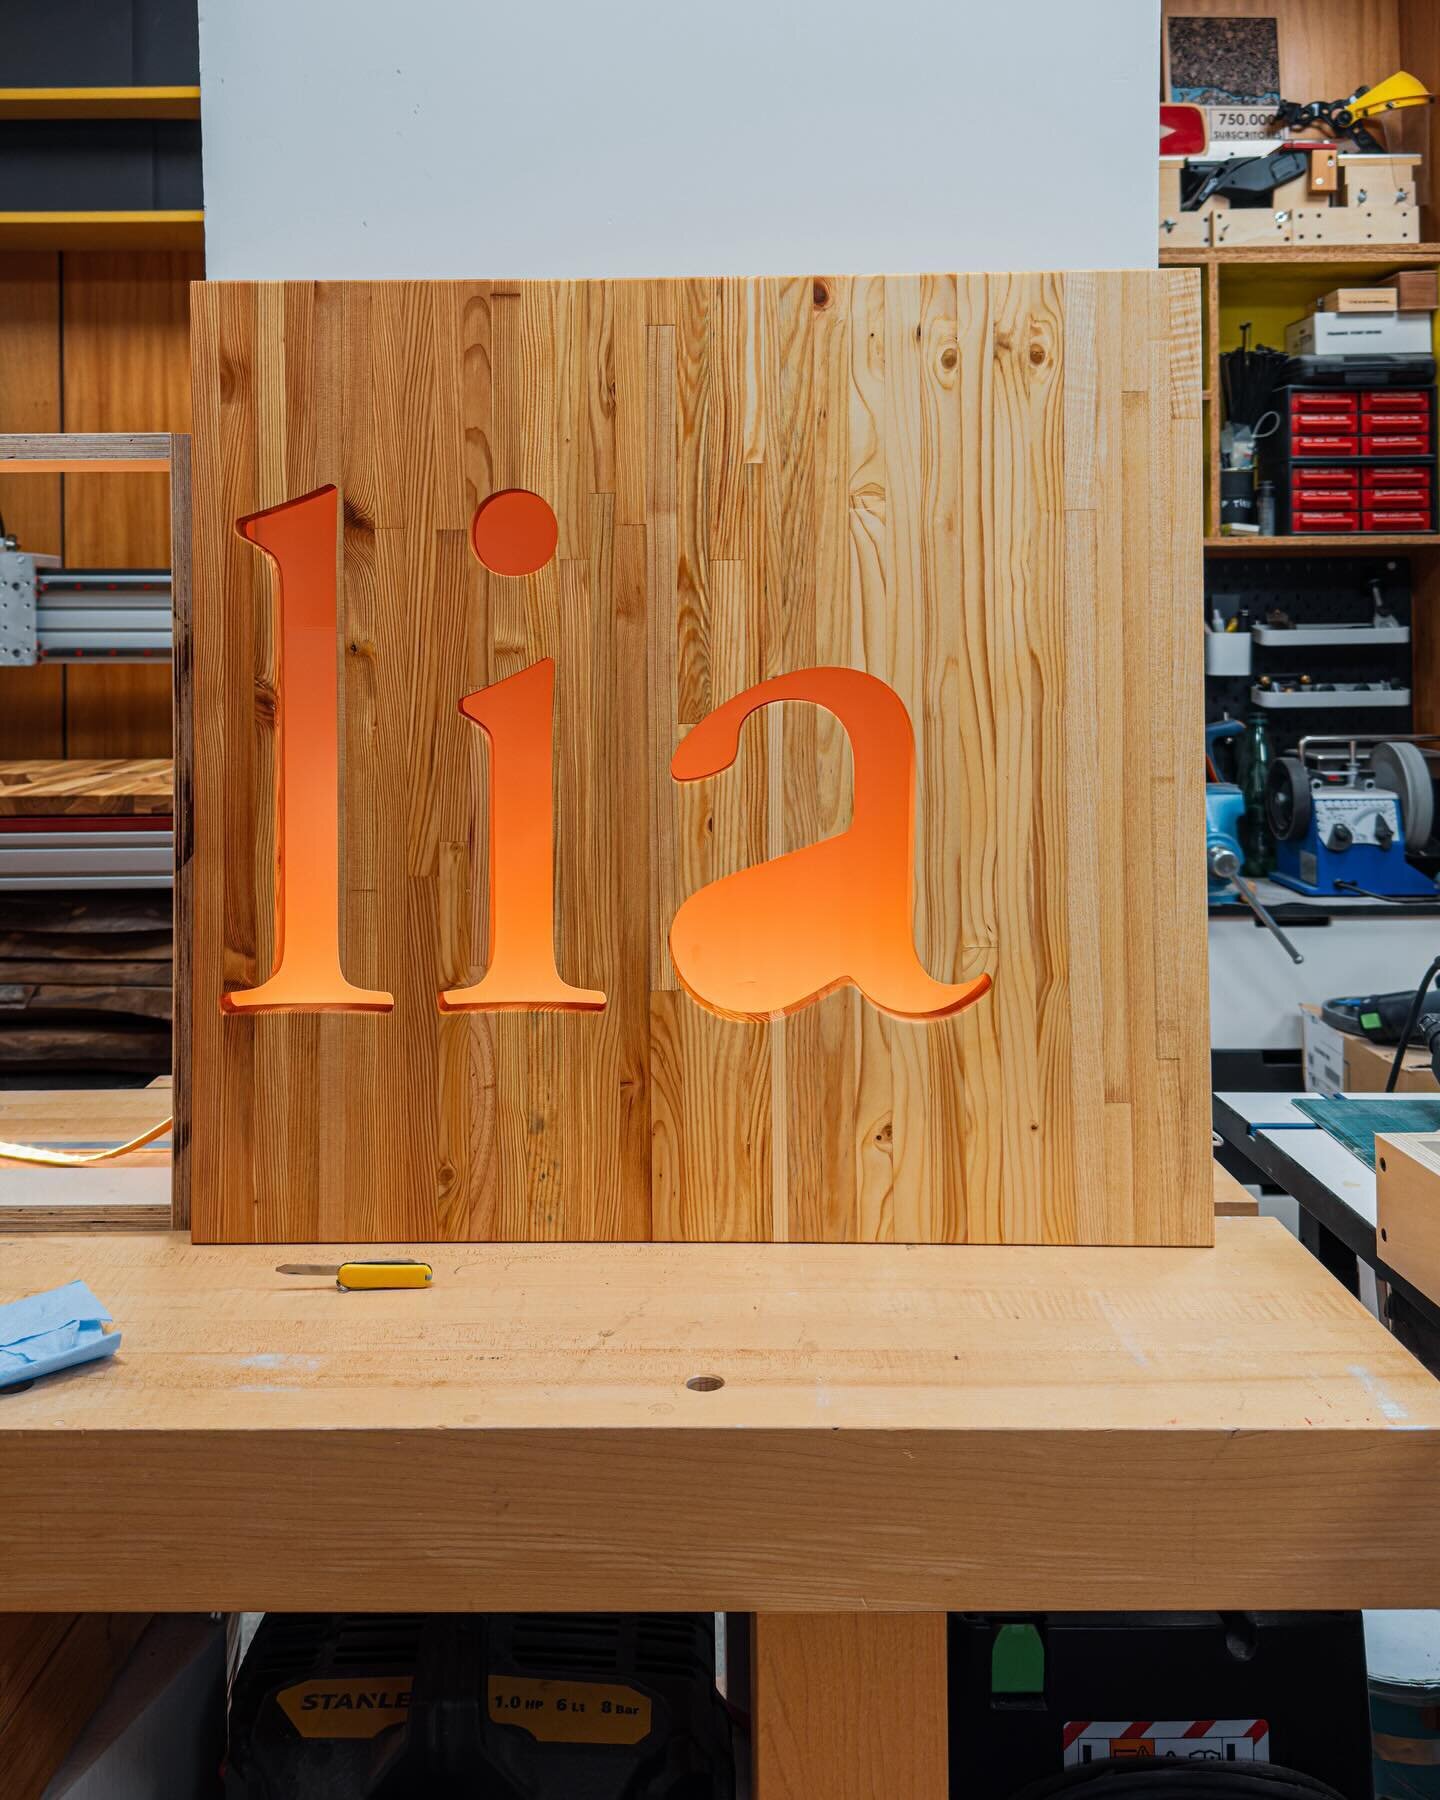 Snippets of my latest project video

#woodworking #lightboxsign #custommade